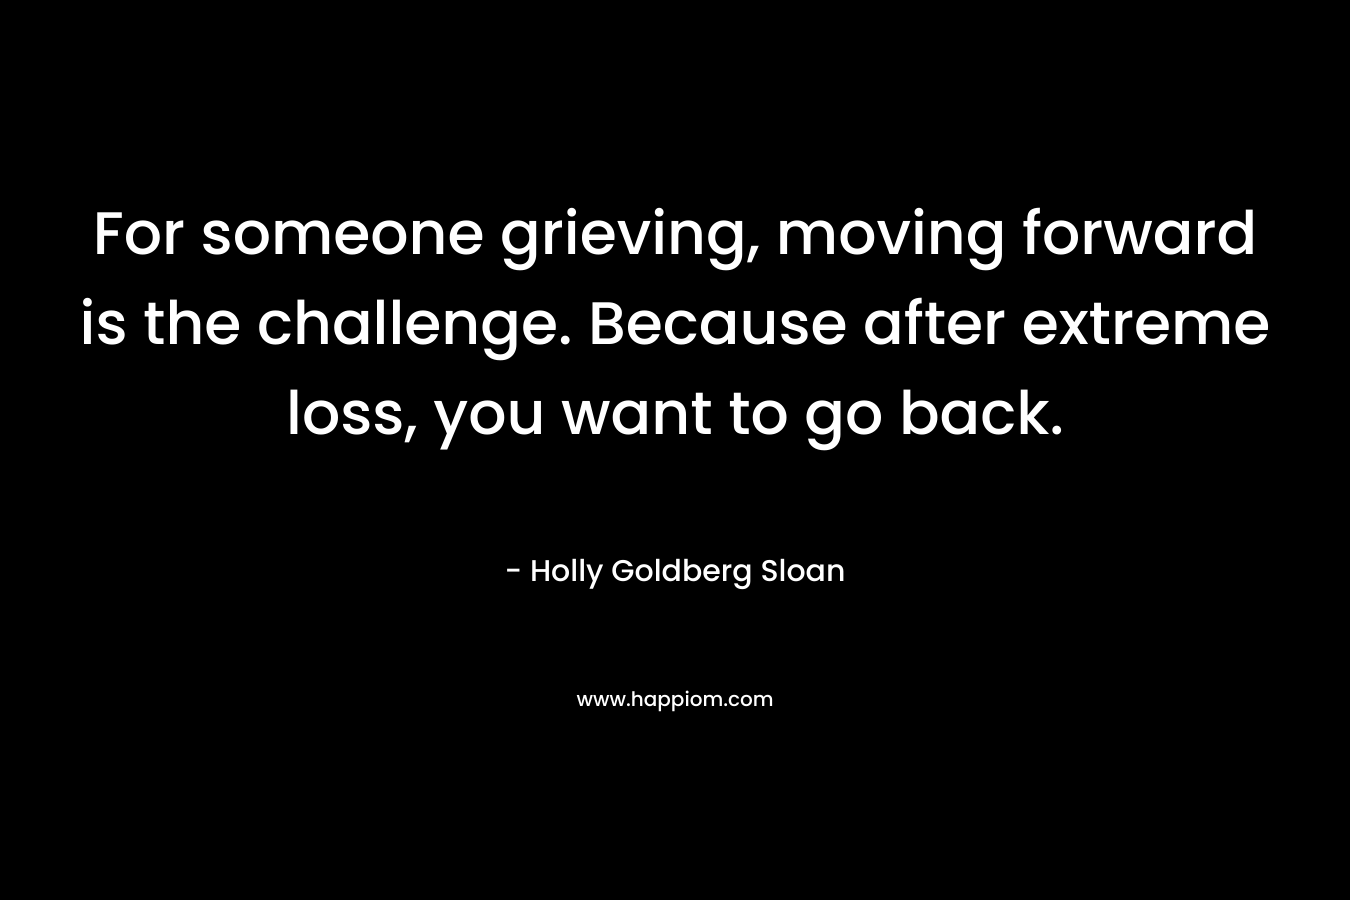 For someone grieving, moving forward is the challenge. Because after extreme loss, you want to go back. – Holly Goldberg Sloan